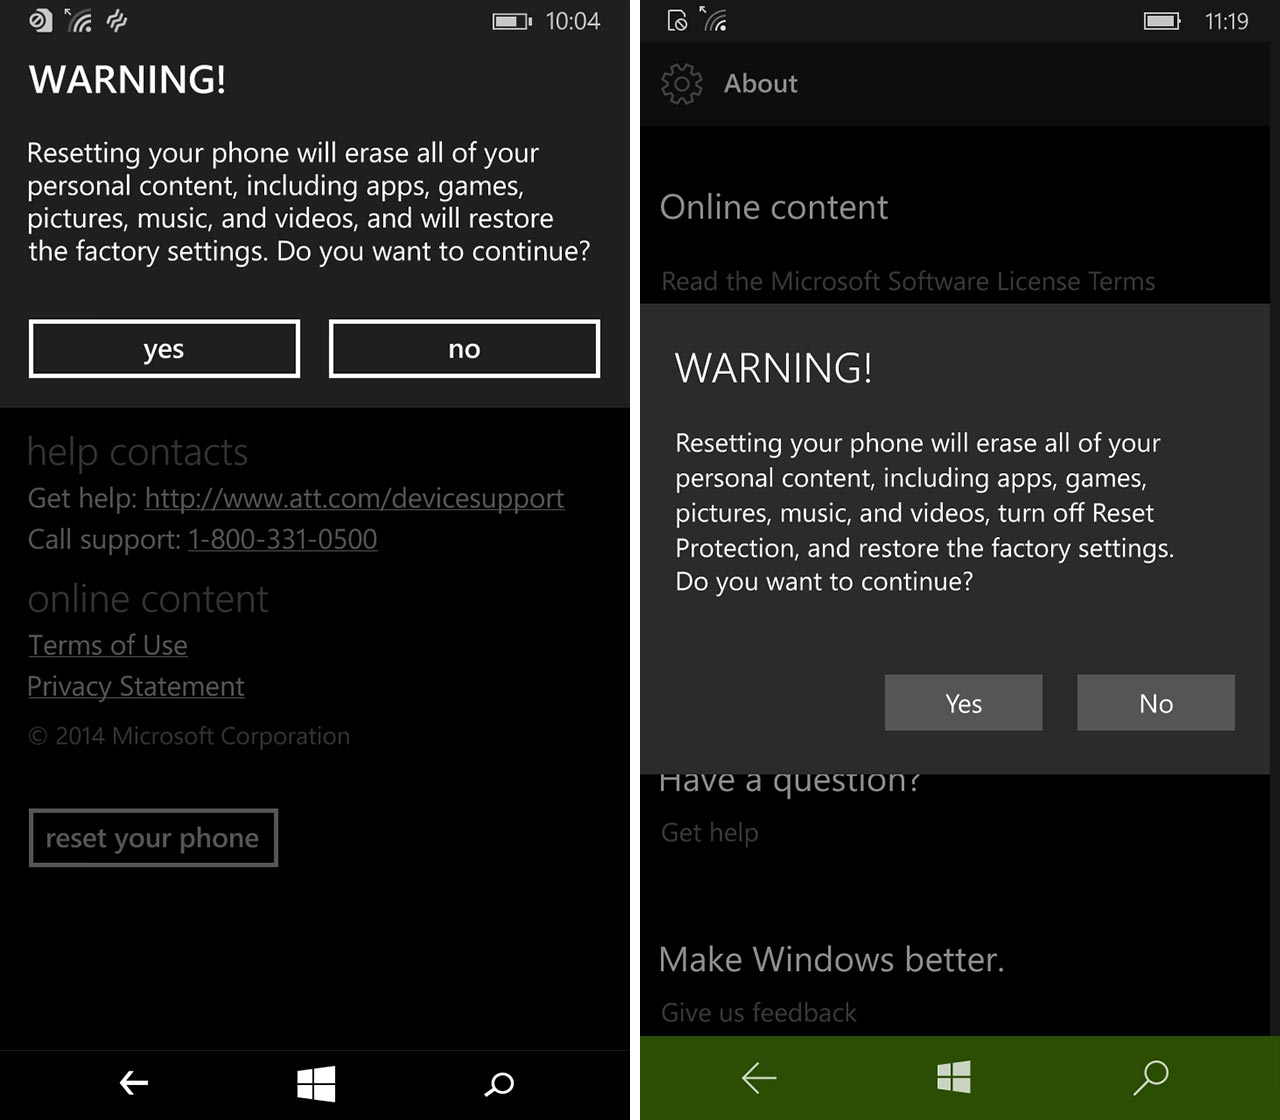 First warning screen for resetting Windows Phone